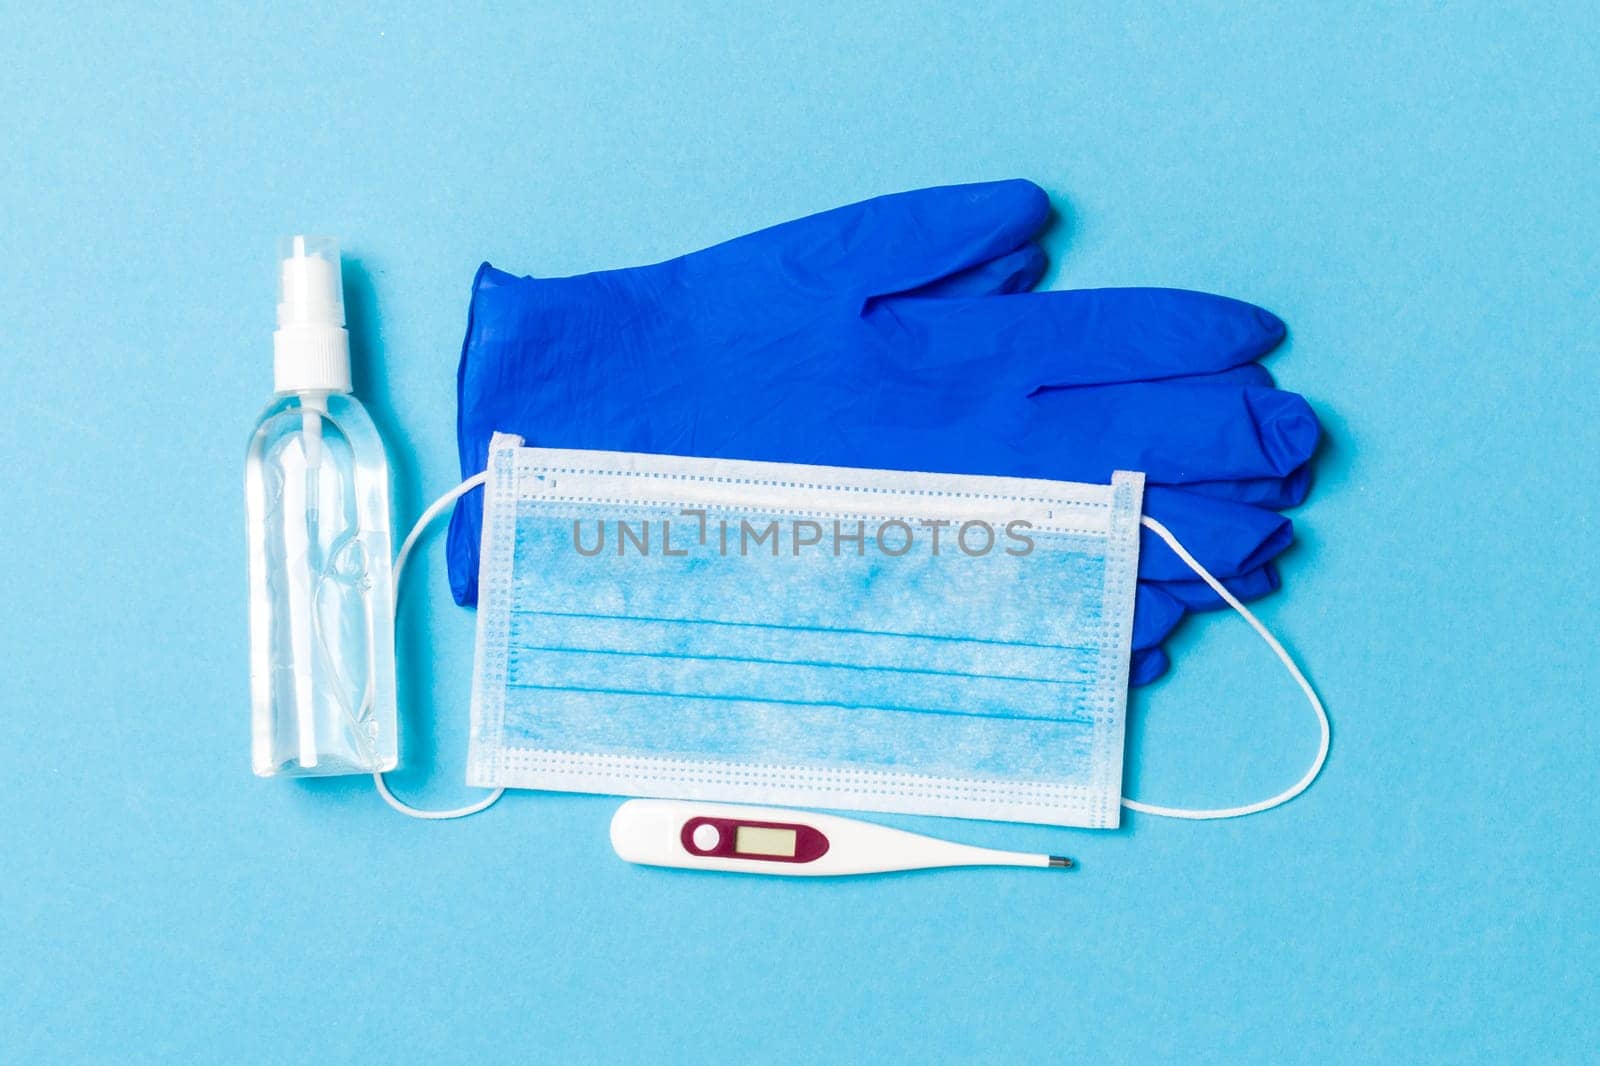 Top view of alcohol hand sanitizer, latex gloves, digital thermometer and medical mask on blue background. Virus protection equipment concept with copy space.